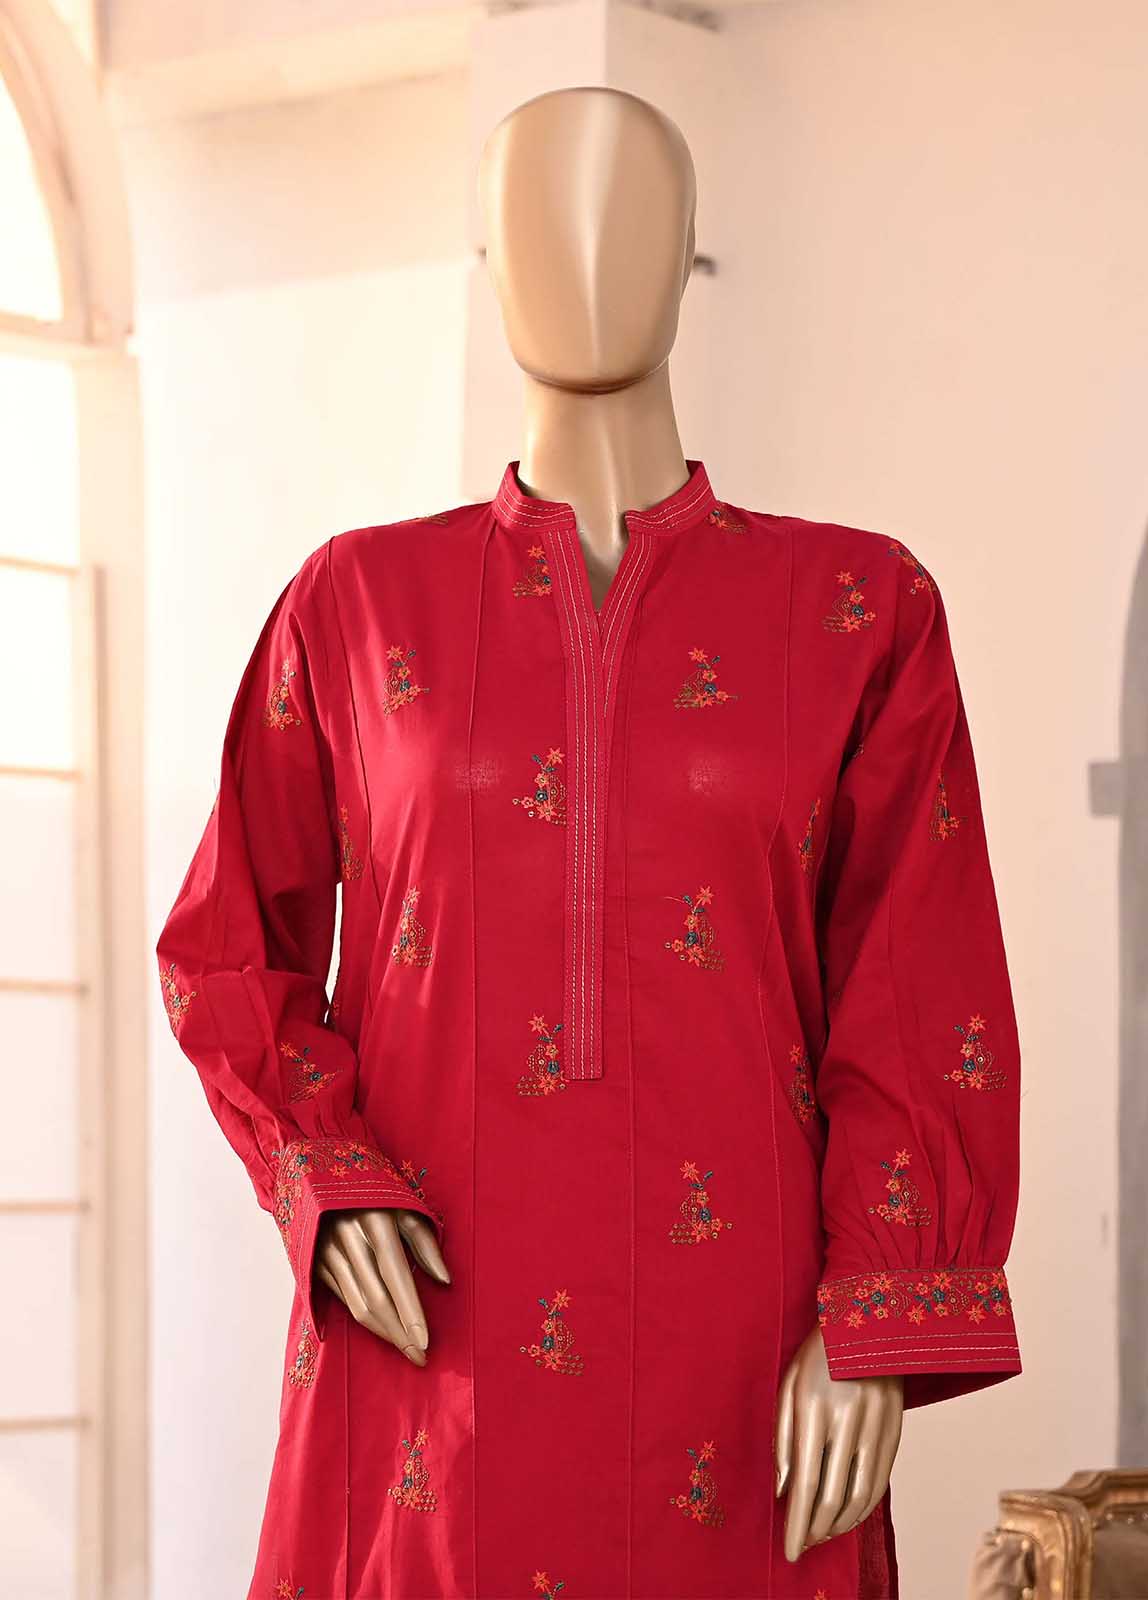 CMFT-013-B - 2 Piece Lawn Embroidered